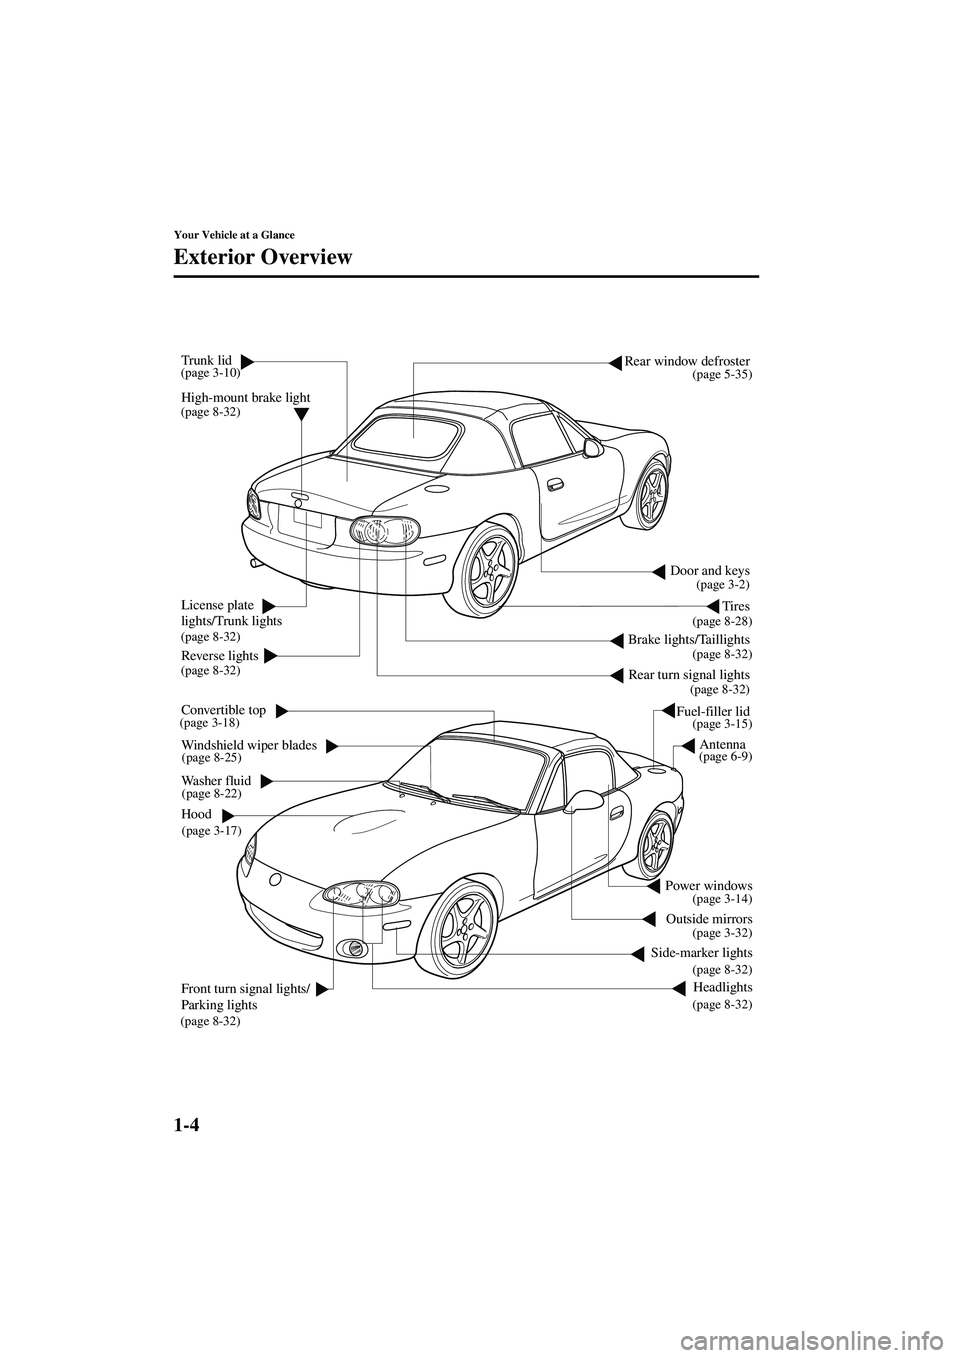 MAZDA MODEL MX-5 MIATA 2004  Owners Manual 1-4
Your Vehicle at a Glance
Form No. 8S15-EA-03G
Exterior Overview
Door and keys
Outside mirrors
Side-marker lights
Headlights
Fuel-filler lid
Tires
Windshield wiper blades
Washer fluid
Hood
Front tu